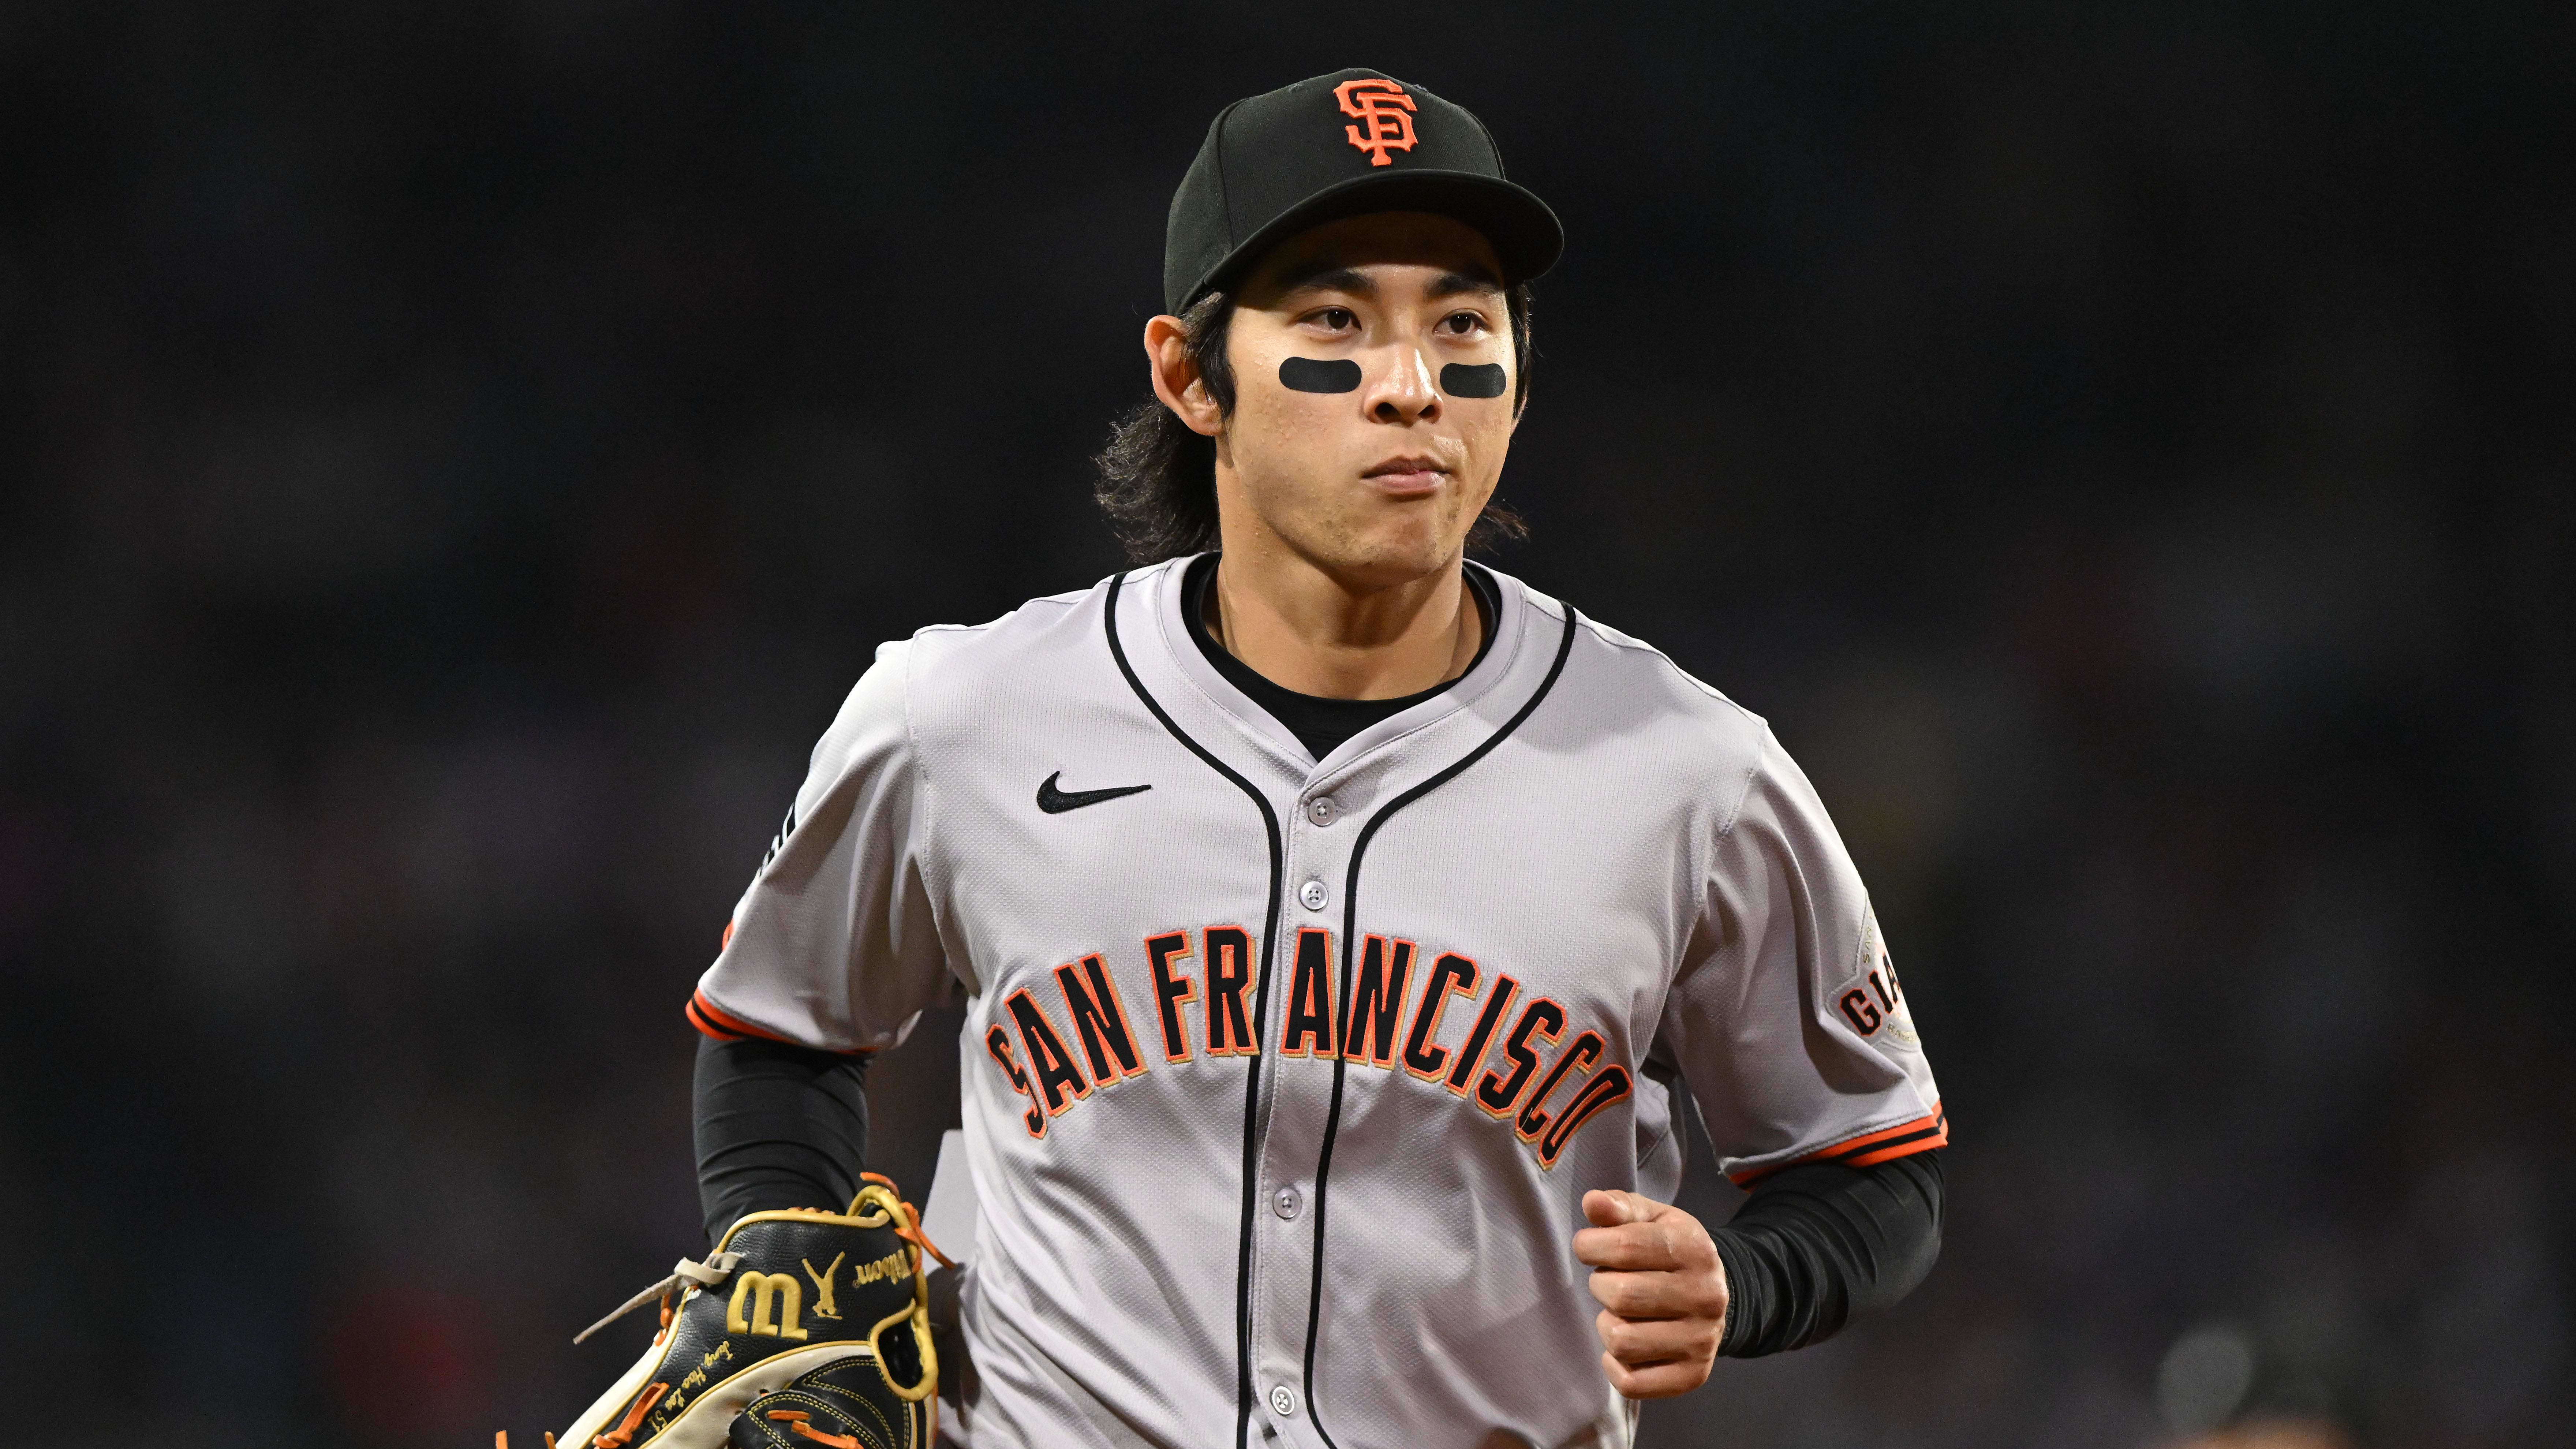 Giants’ Jung Hoo Lee Totally Redeems Himself After Embarrassing Miscue in Outfield